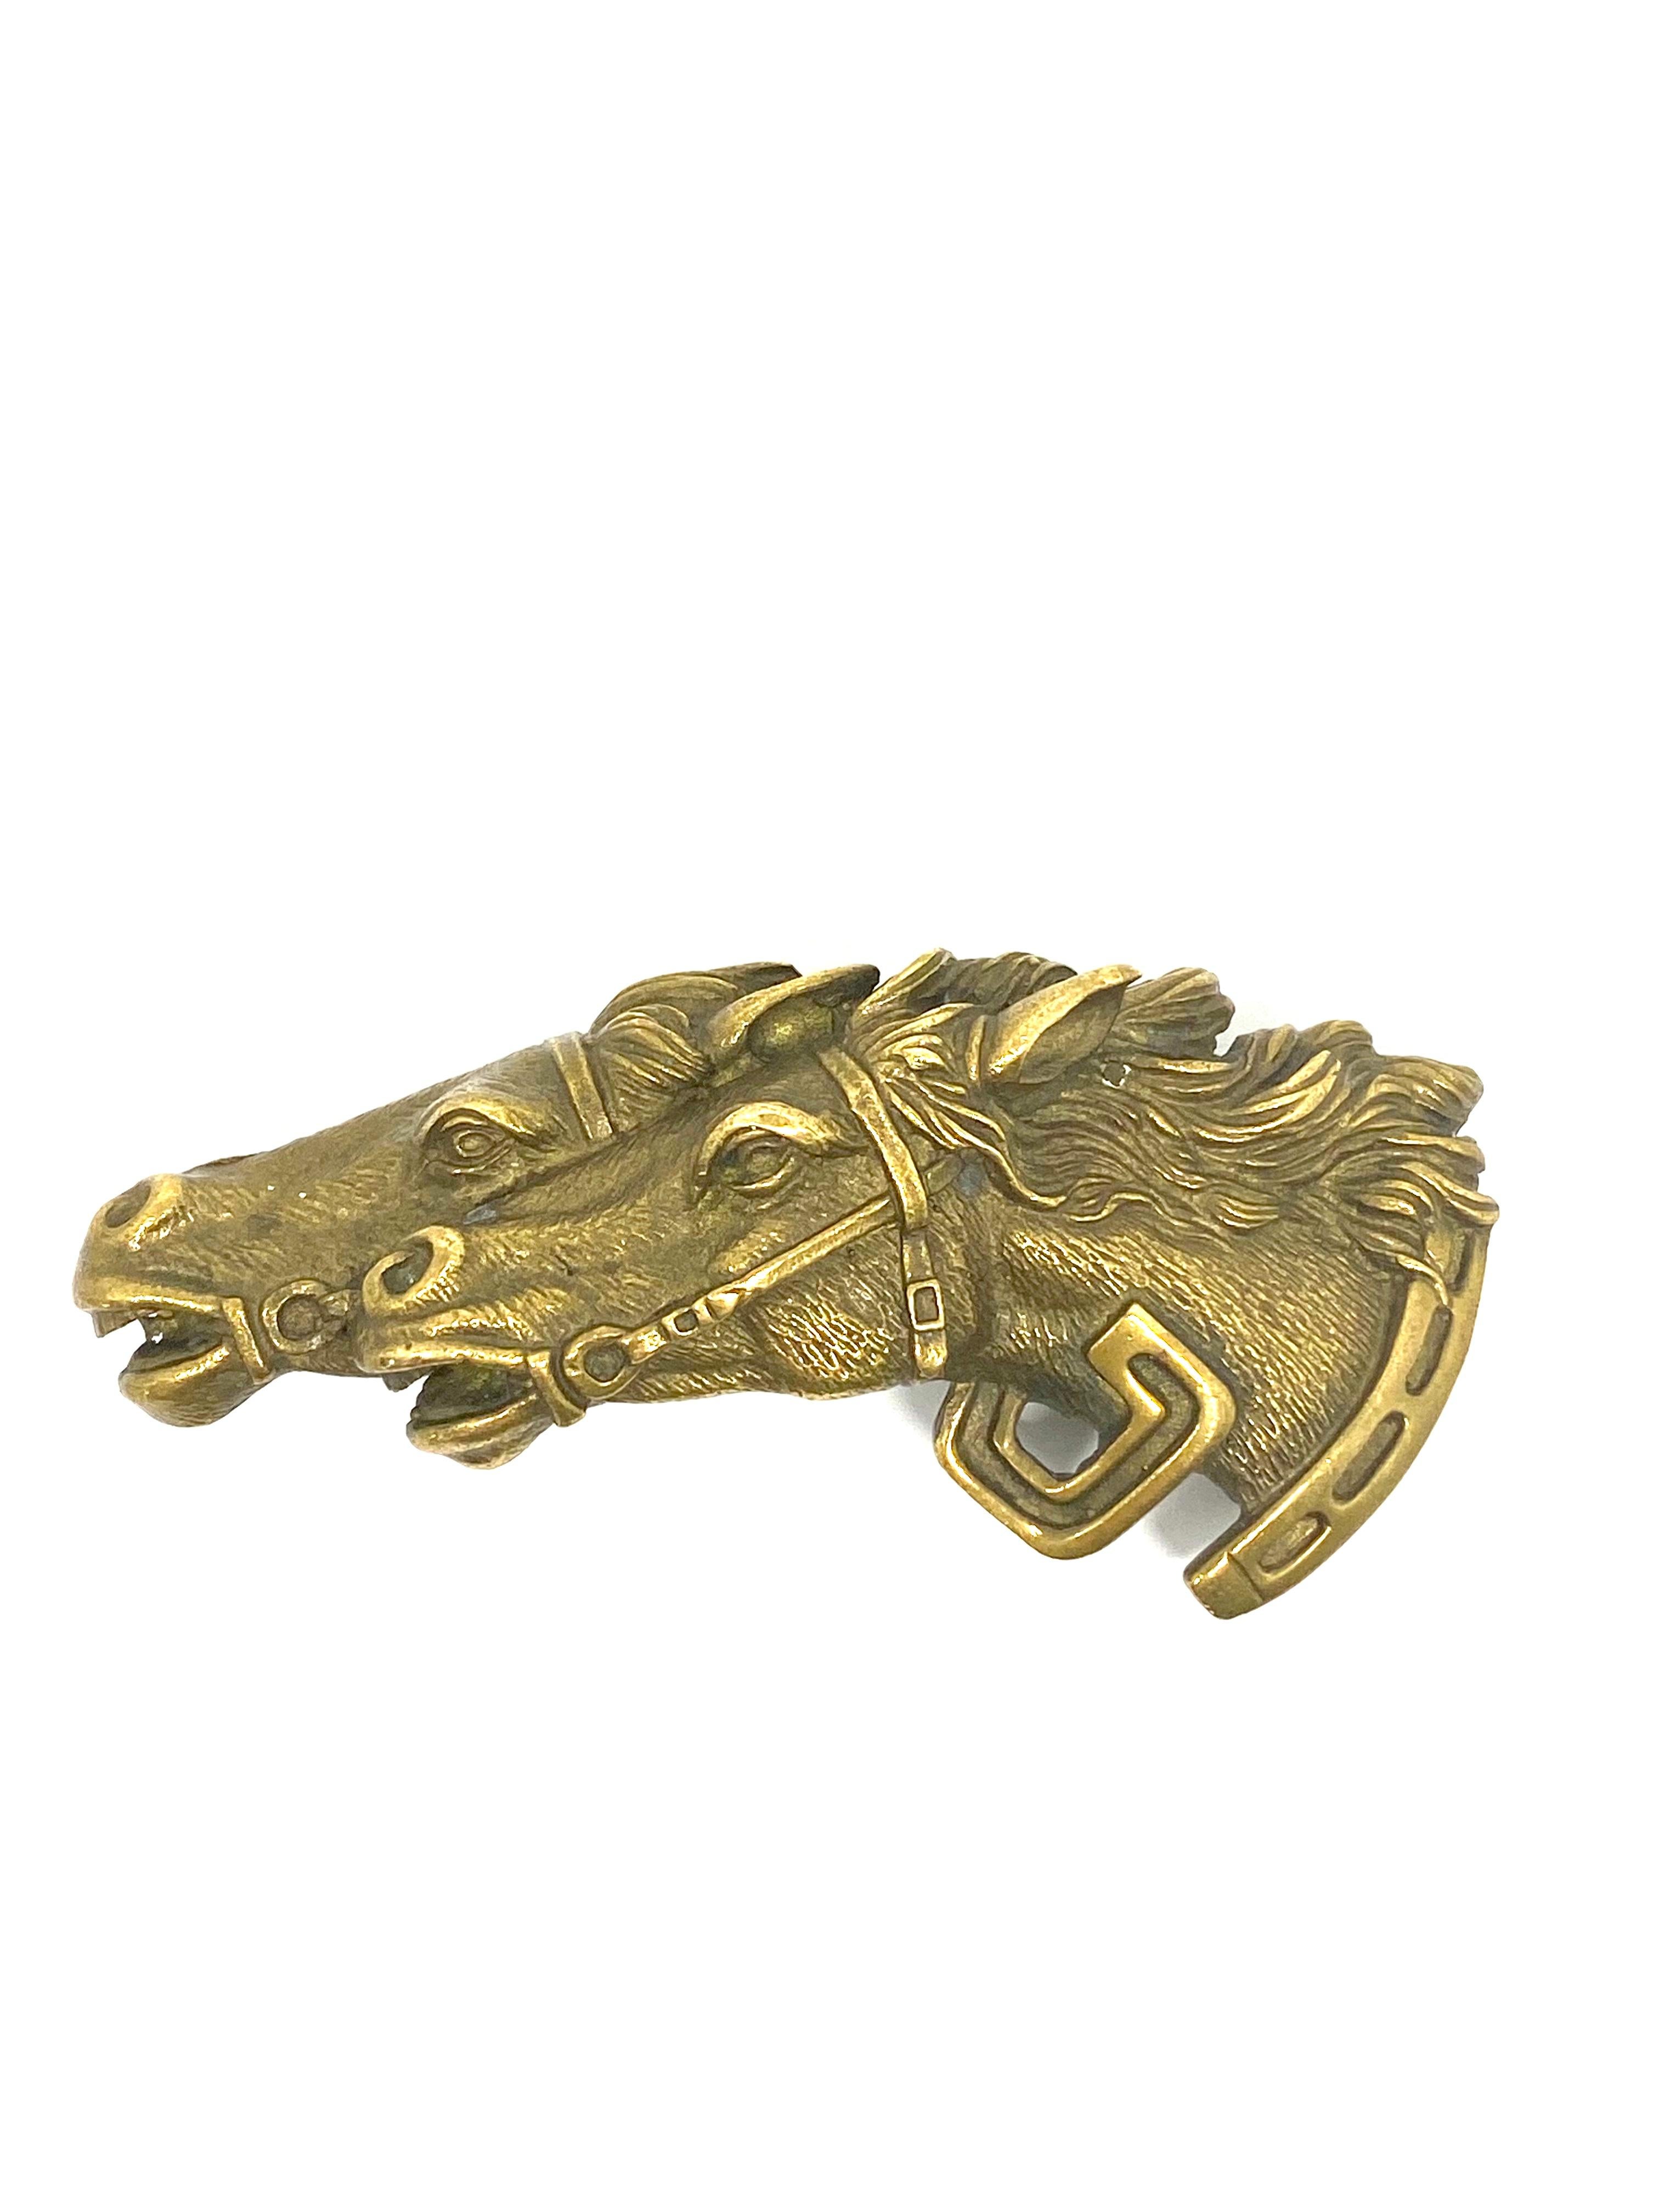 
Vintage GUCCI Italy Double Horse Head Bronze Belt Buckle

Product details:
Bronze
Circa 1970
Hallmarks: GUCCI Italy
Made in Italy
Fits 1” wide belt
Total weight is 48.0 g.
